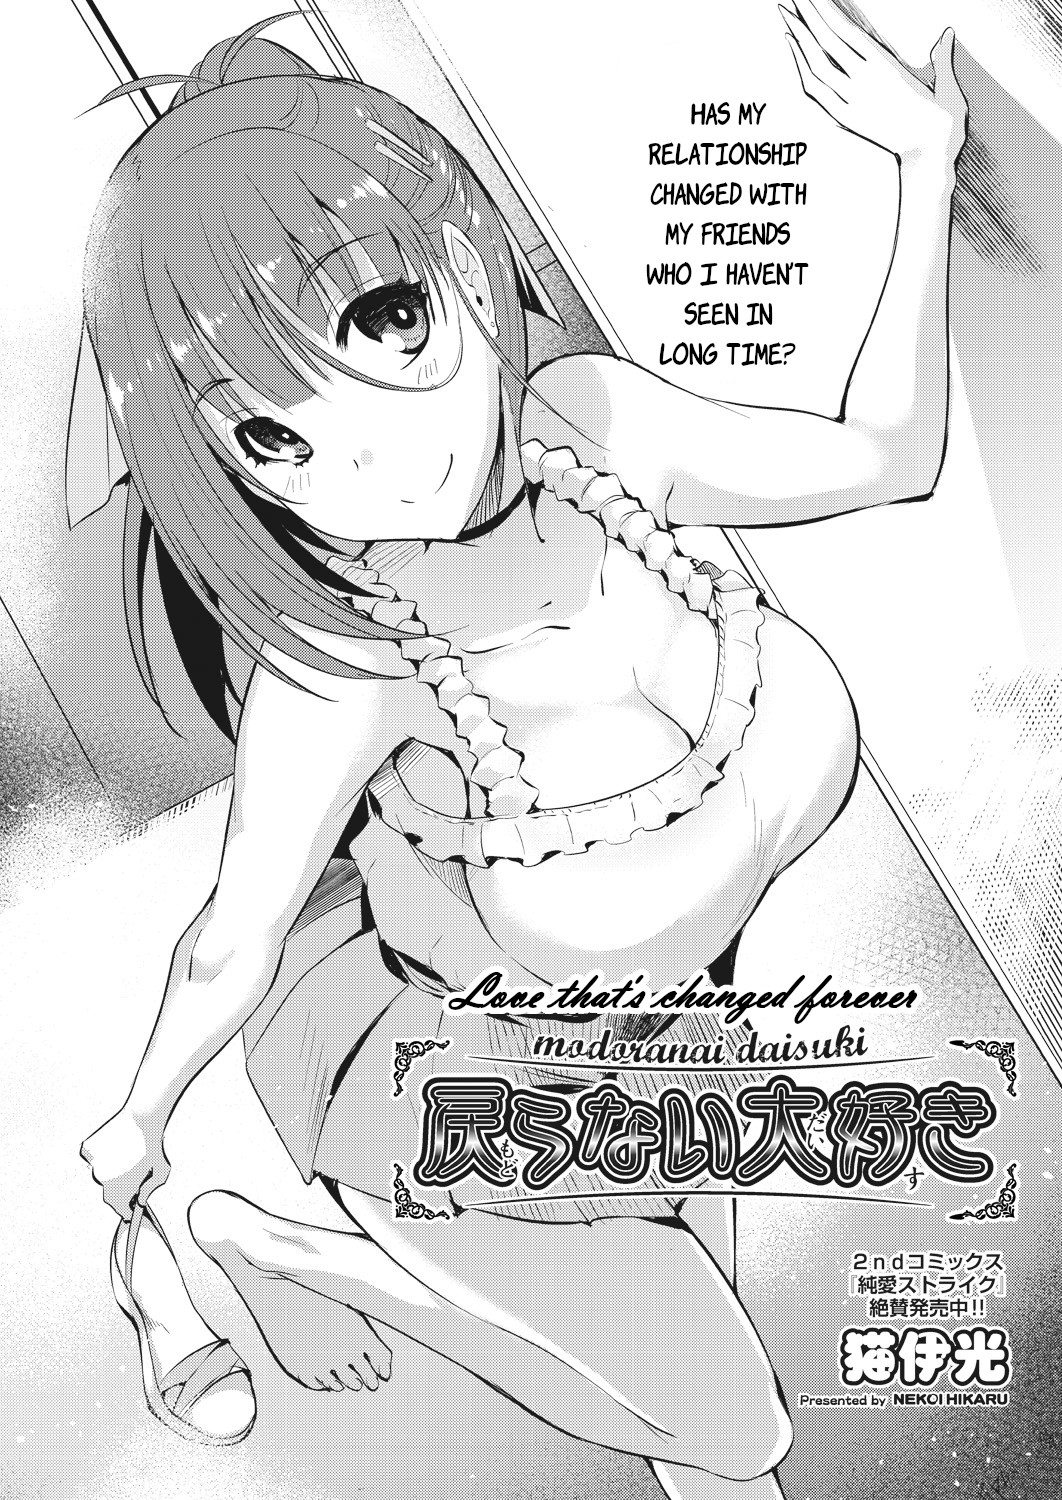 Hentai Manga Comic-Love That's Changed Forever-Read-2